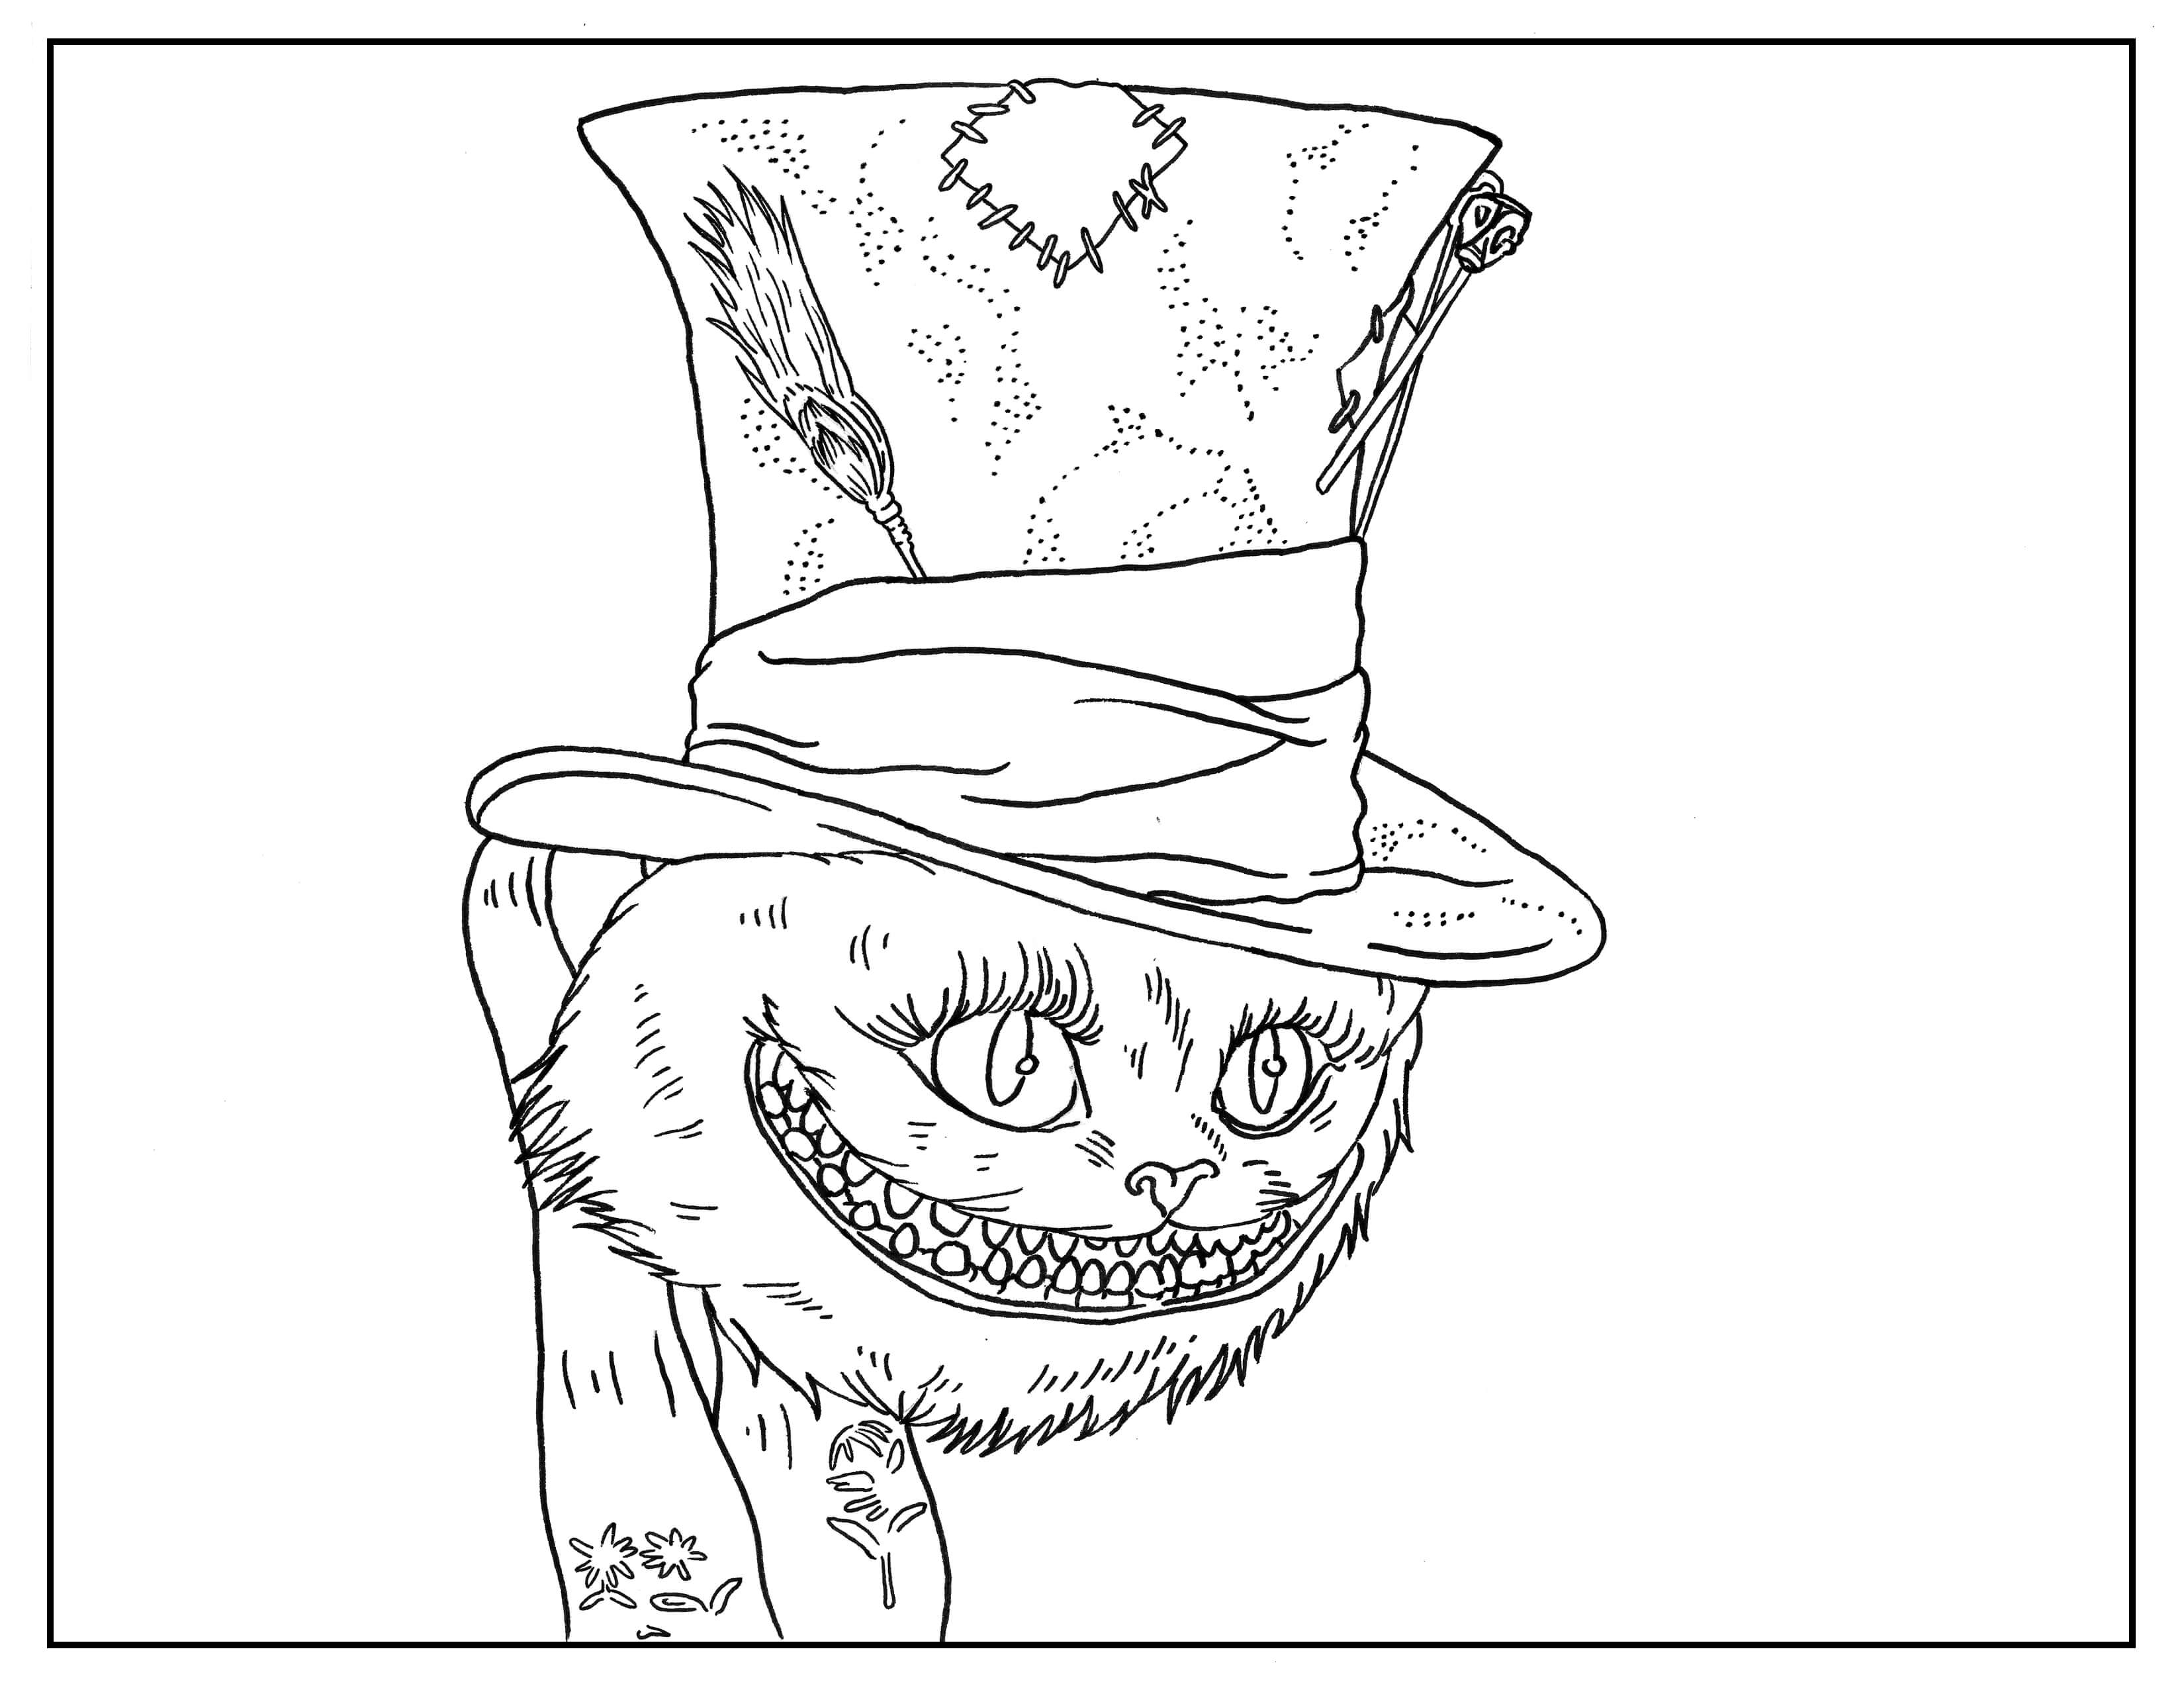 Coloring page inspired by Tim Burton's movie Alice in Wonderland, with Johnny Depp